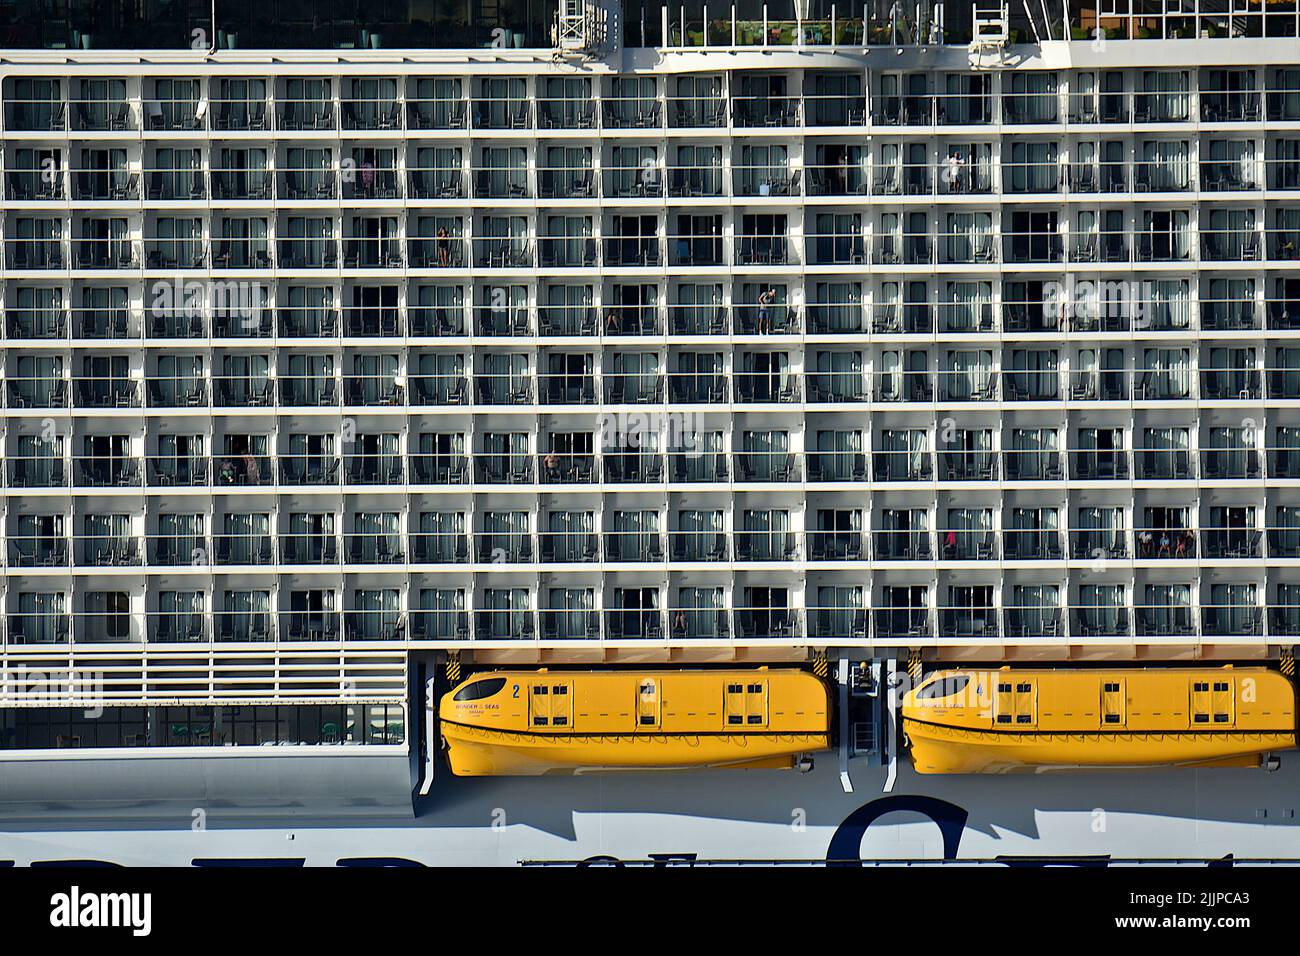 The liner Wonder of the Seas cruise ship arrives at the French Mediterranean port of Marseille. Stock Photo